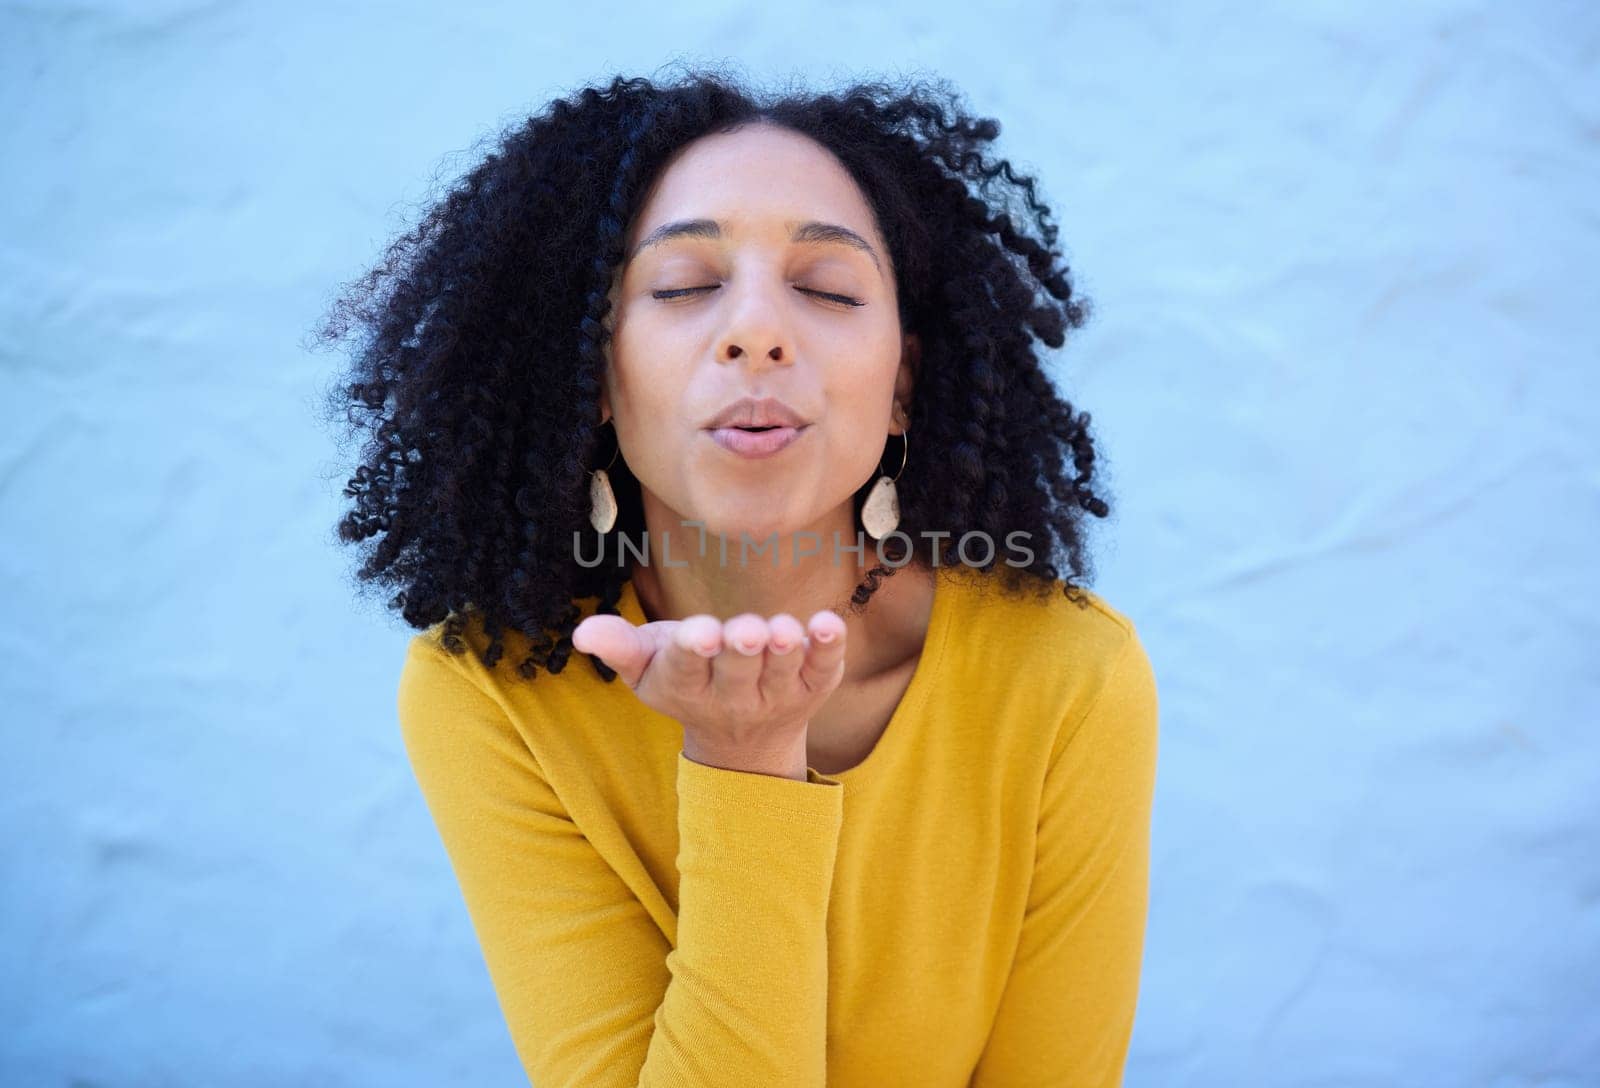 Black woman blowing kiss in air for love, care and flirting on blue background, wall backdrop or outdoor. Young girl, hand kisses and expression of happiness, romance and kissing face emoji with lips.